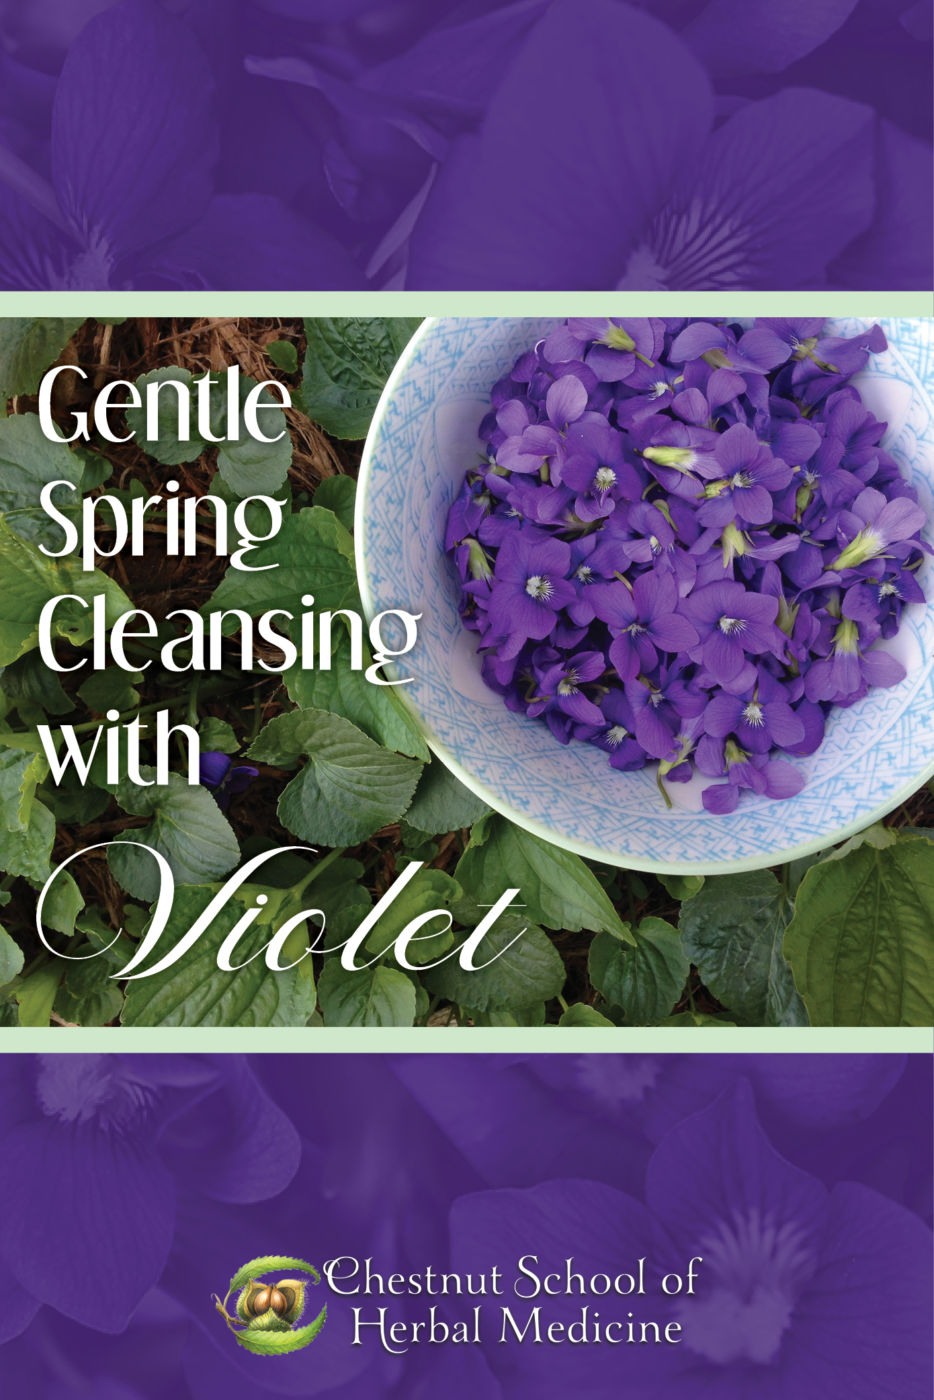 Gentle spring cleansing with violet.